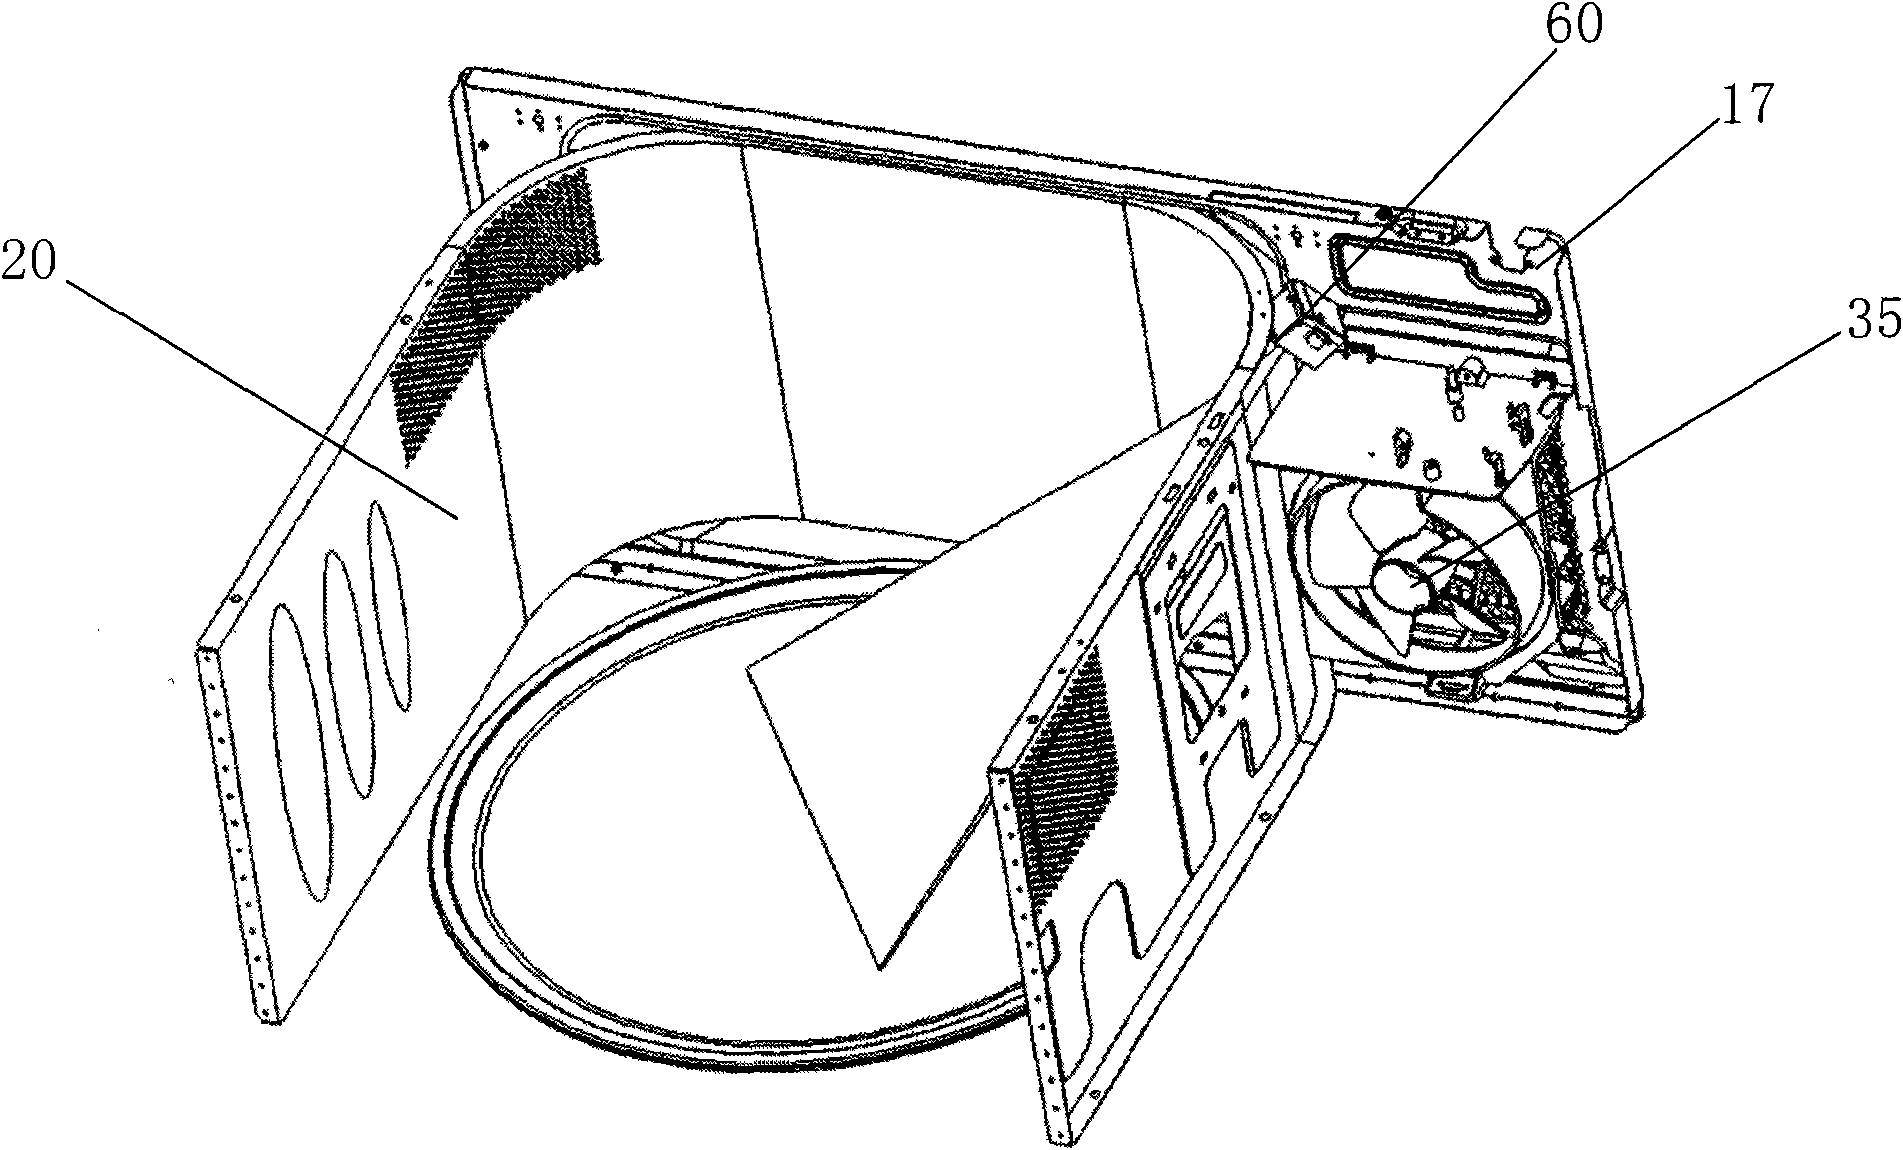 Sensor structure of microwave oven